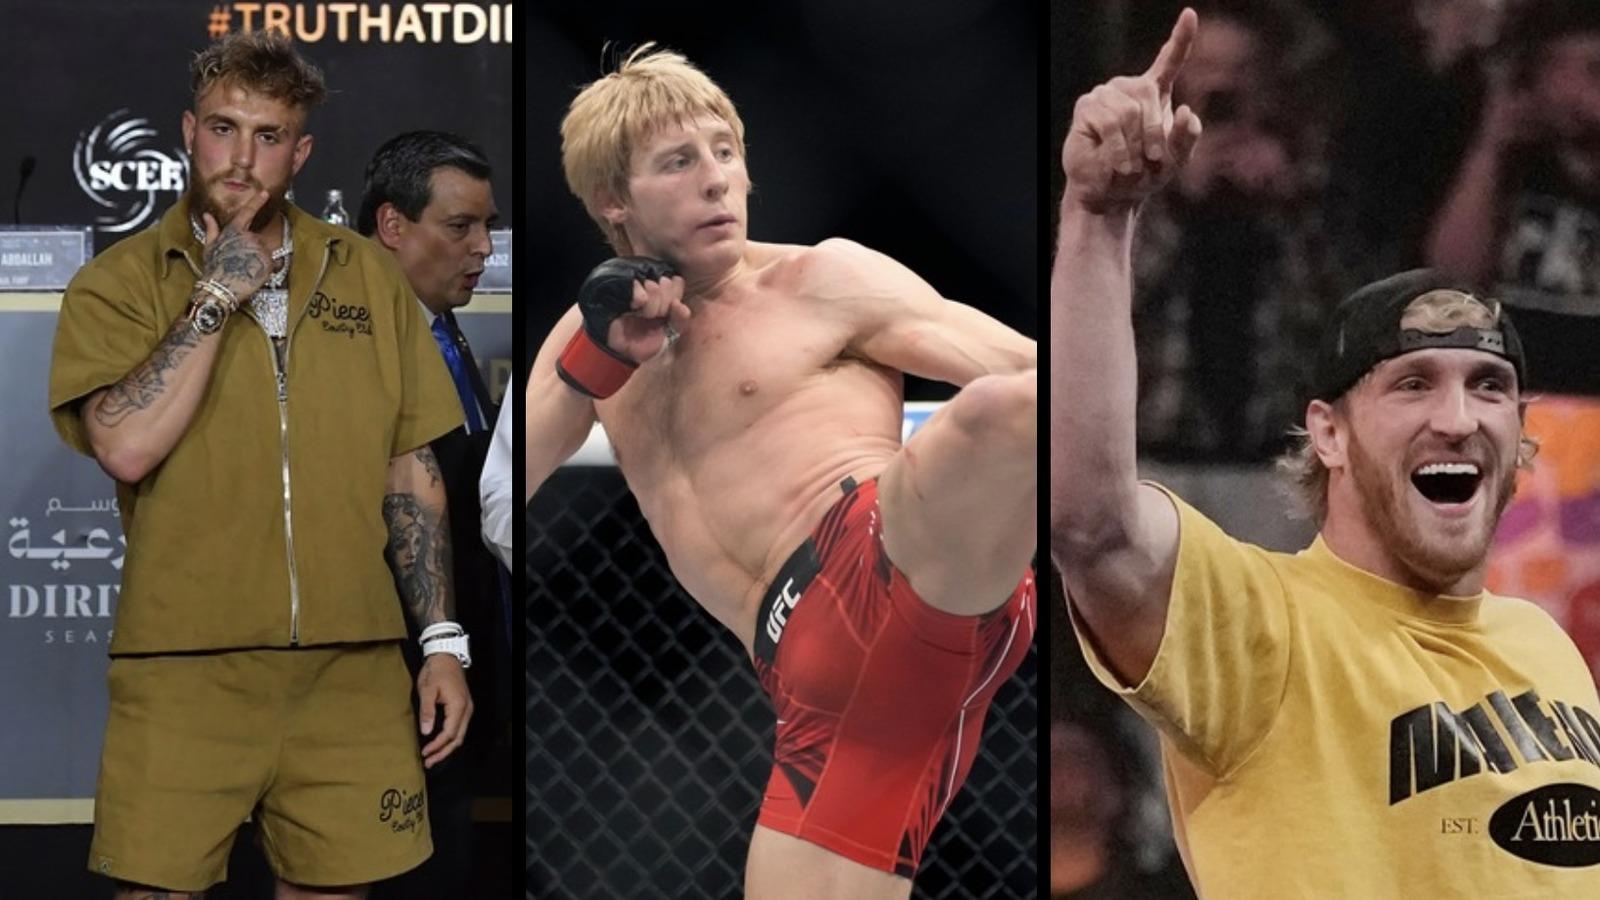 Jake Paul claims his brother, Logan, would destroy Paddy Pimblett in a UFC fight